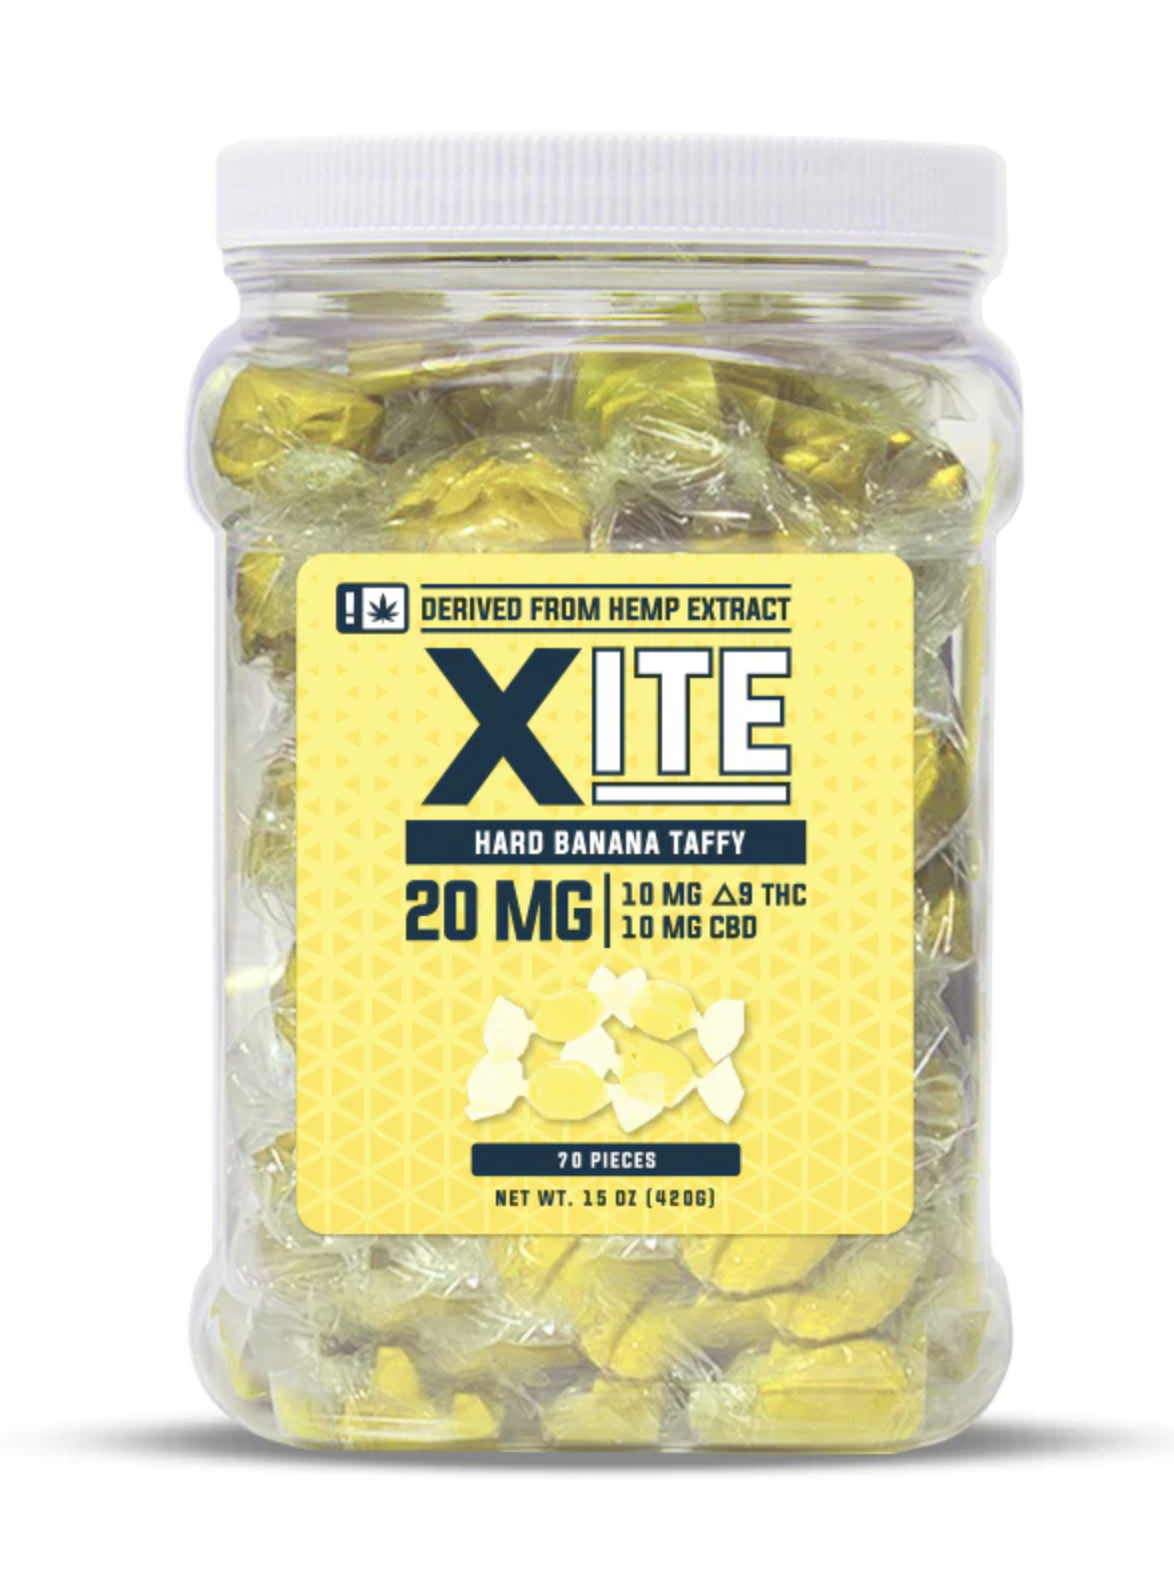 Delta 9 Banana Taffy - 20mg - Xite | Apotheca.org Delivers THC, Free!*